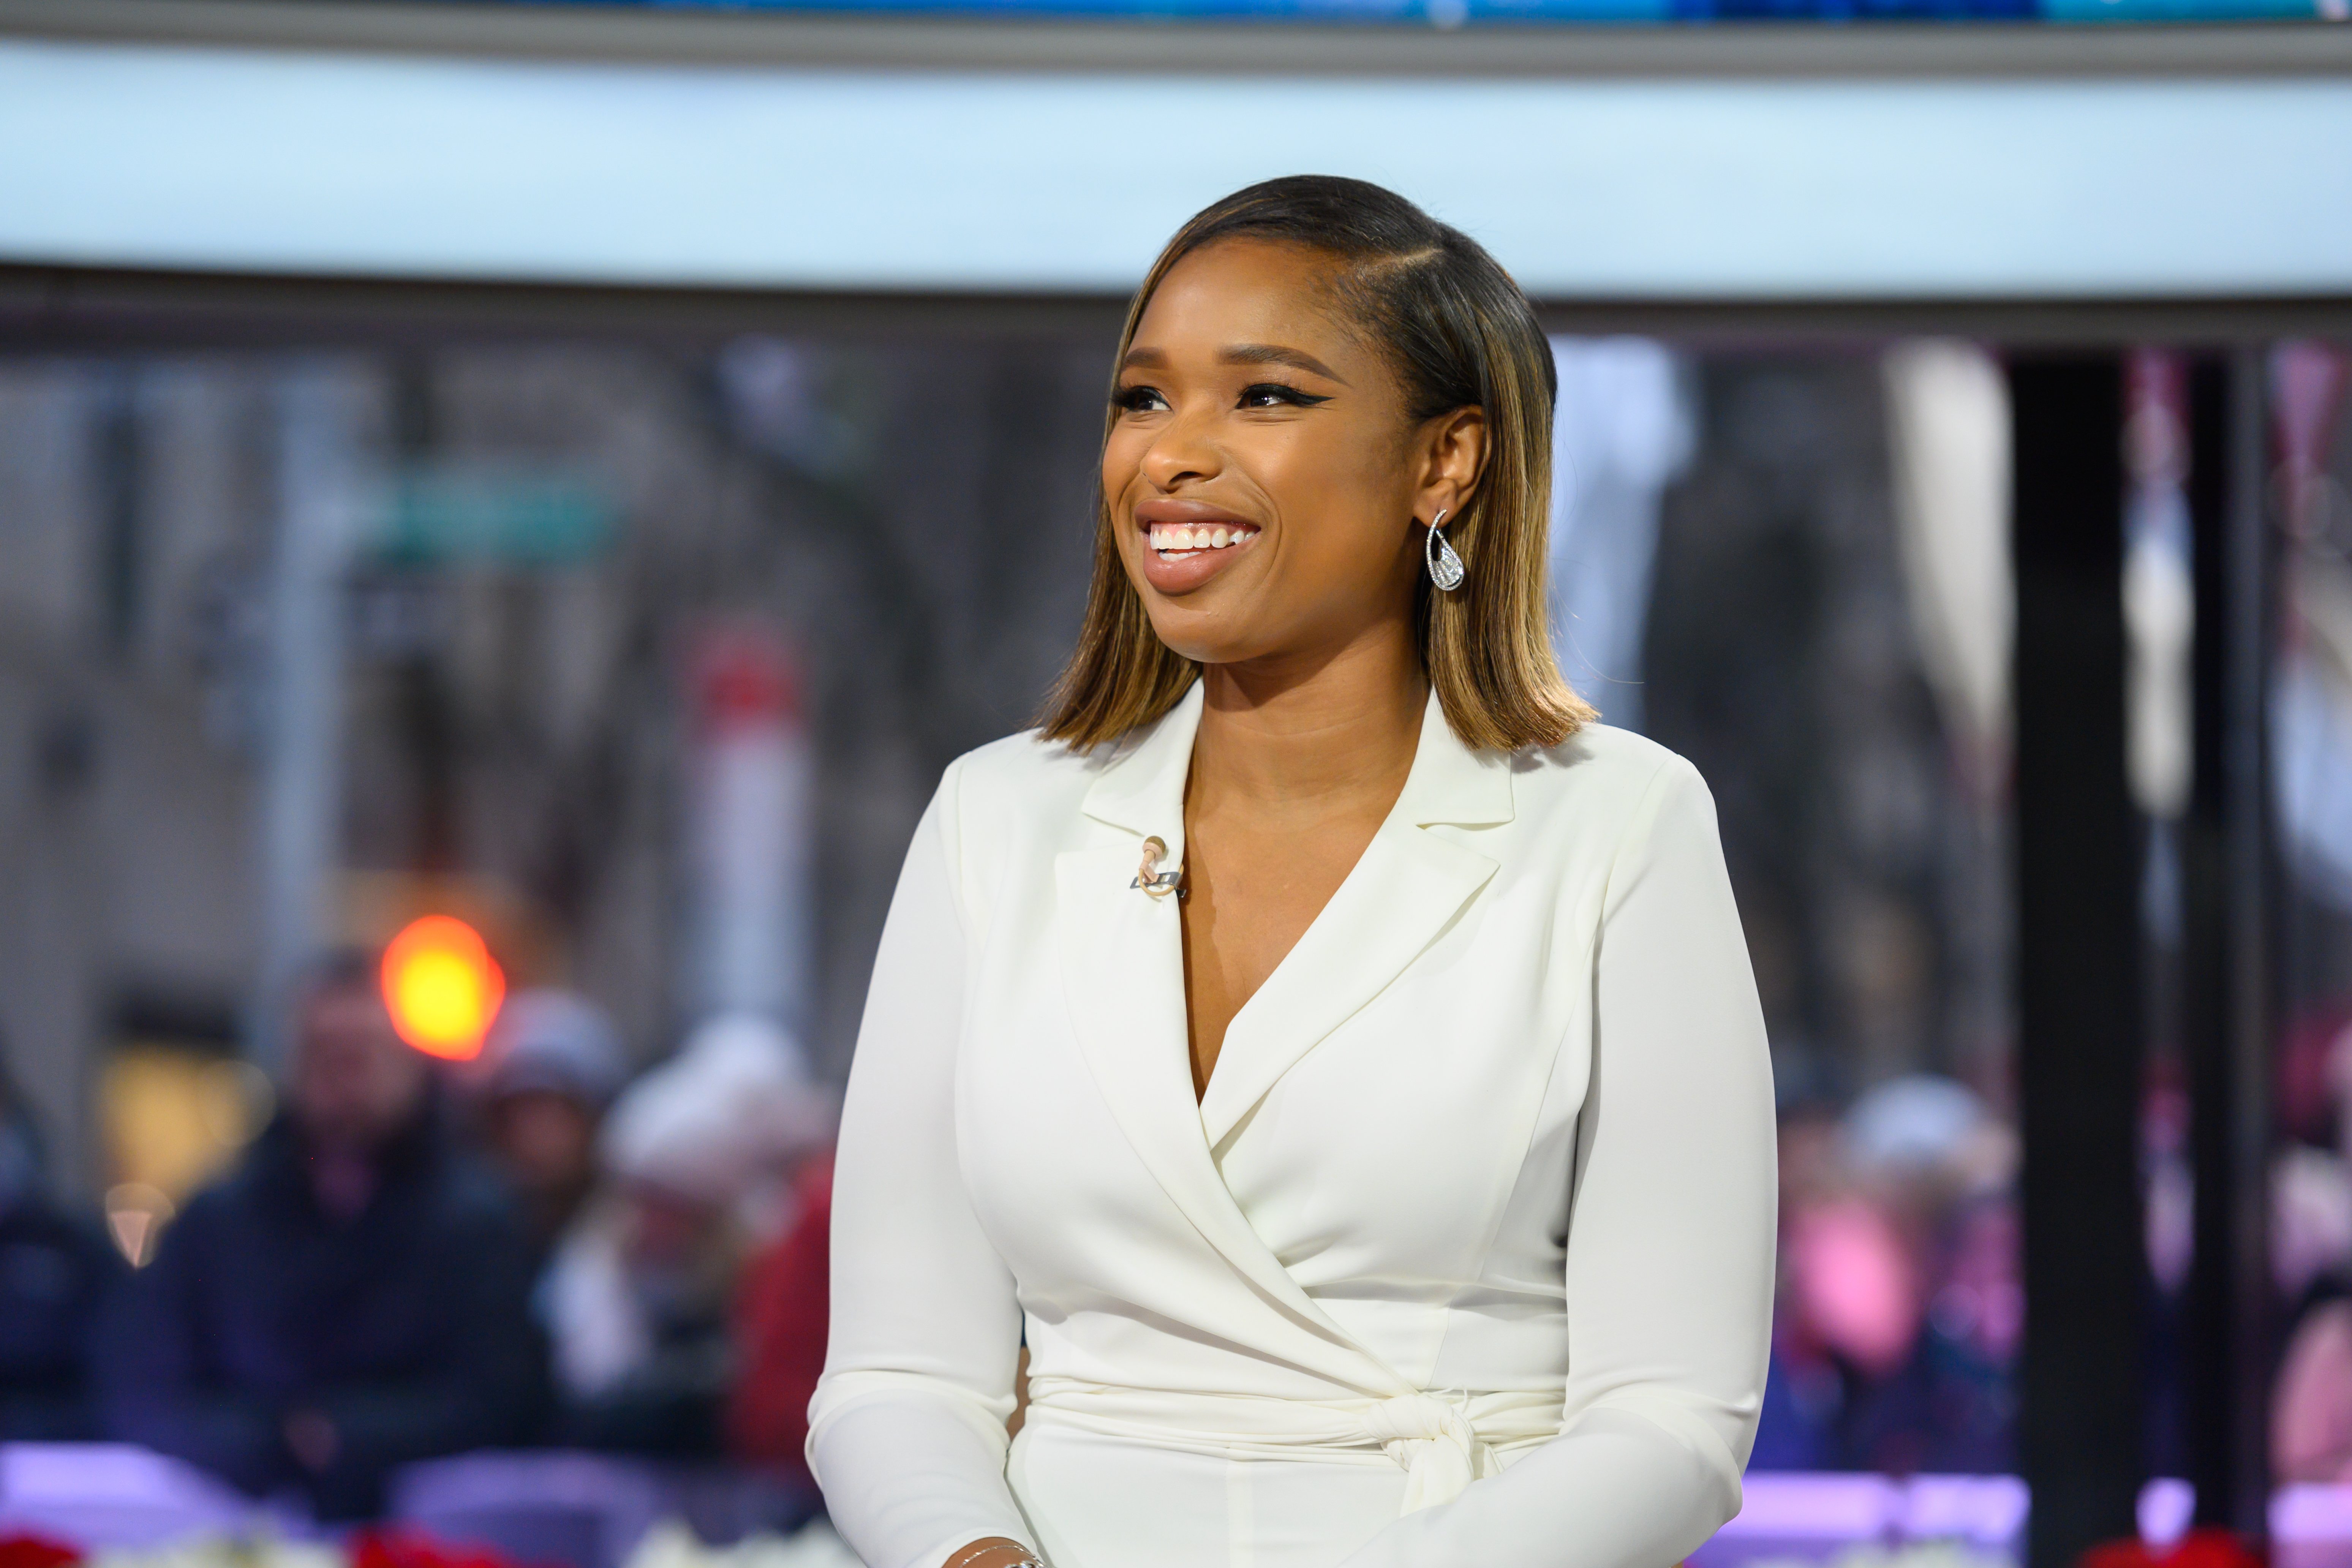 Jennifer Hudson during her TV guesting at "Today" show on  December 16, 2019. | Photo: GettyImages